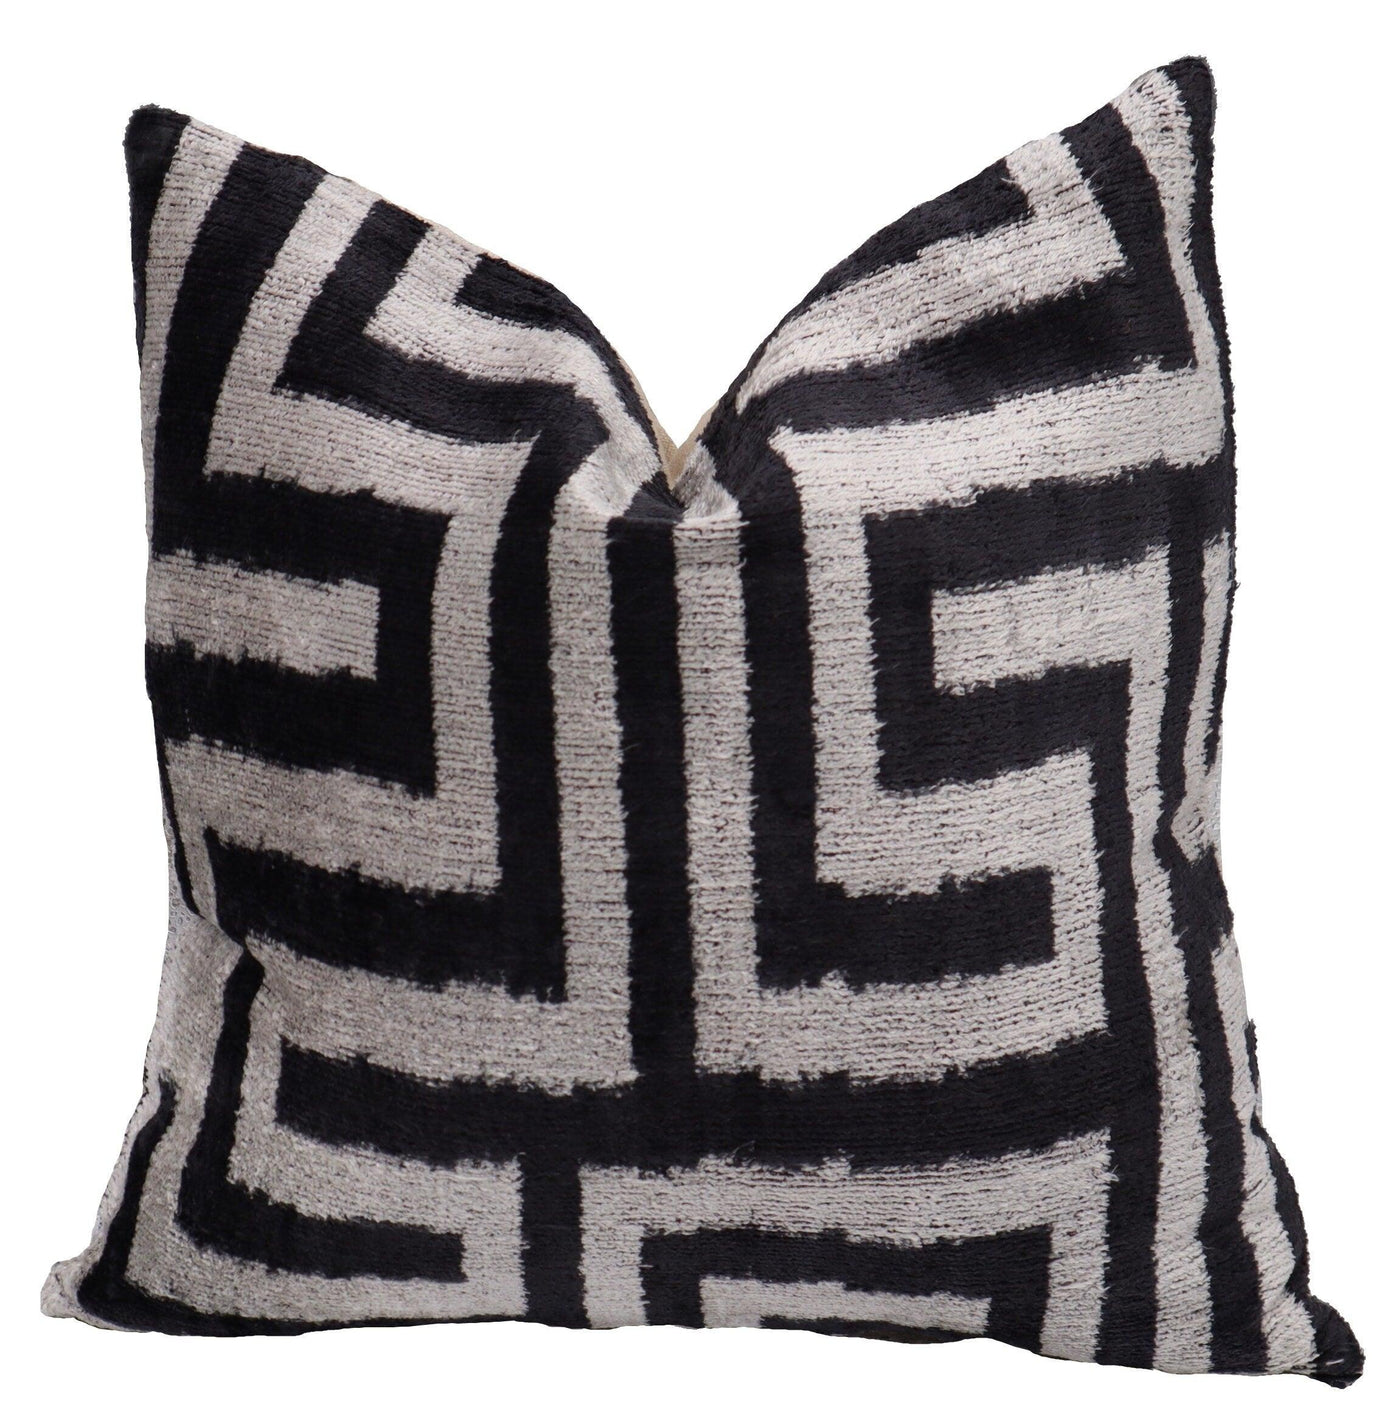 Canvello Black And White Throw Pillows | 16 x 16 in (40 x 40 cm)